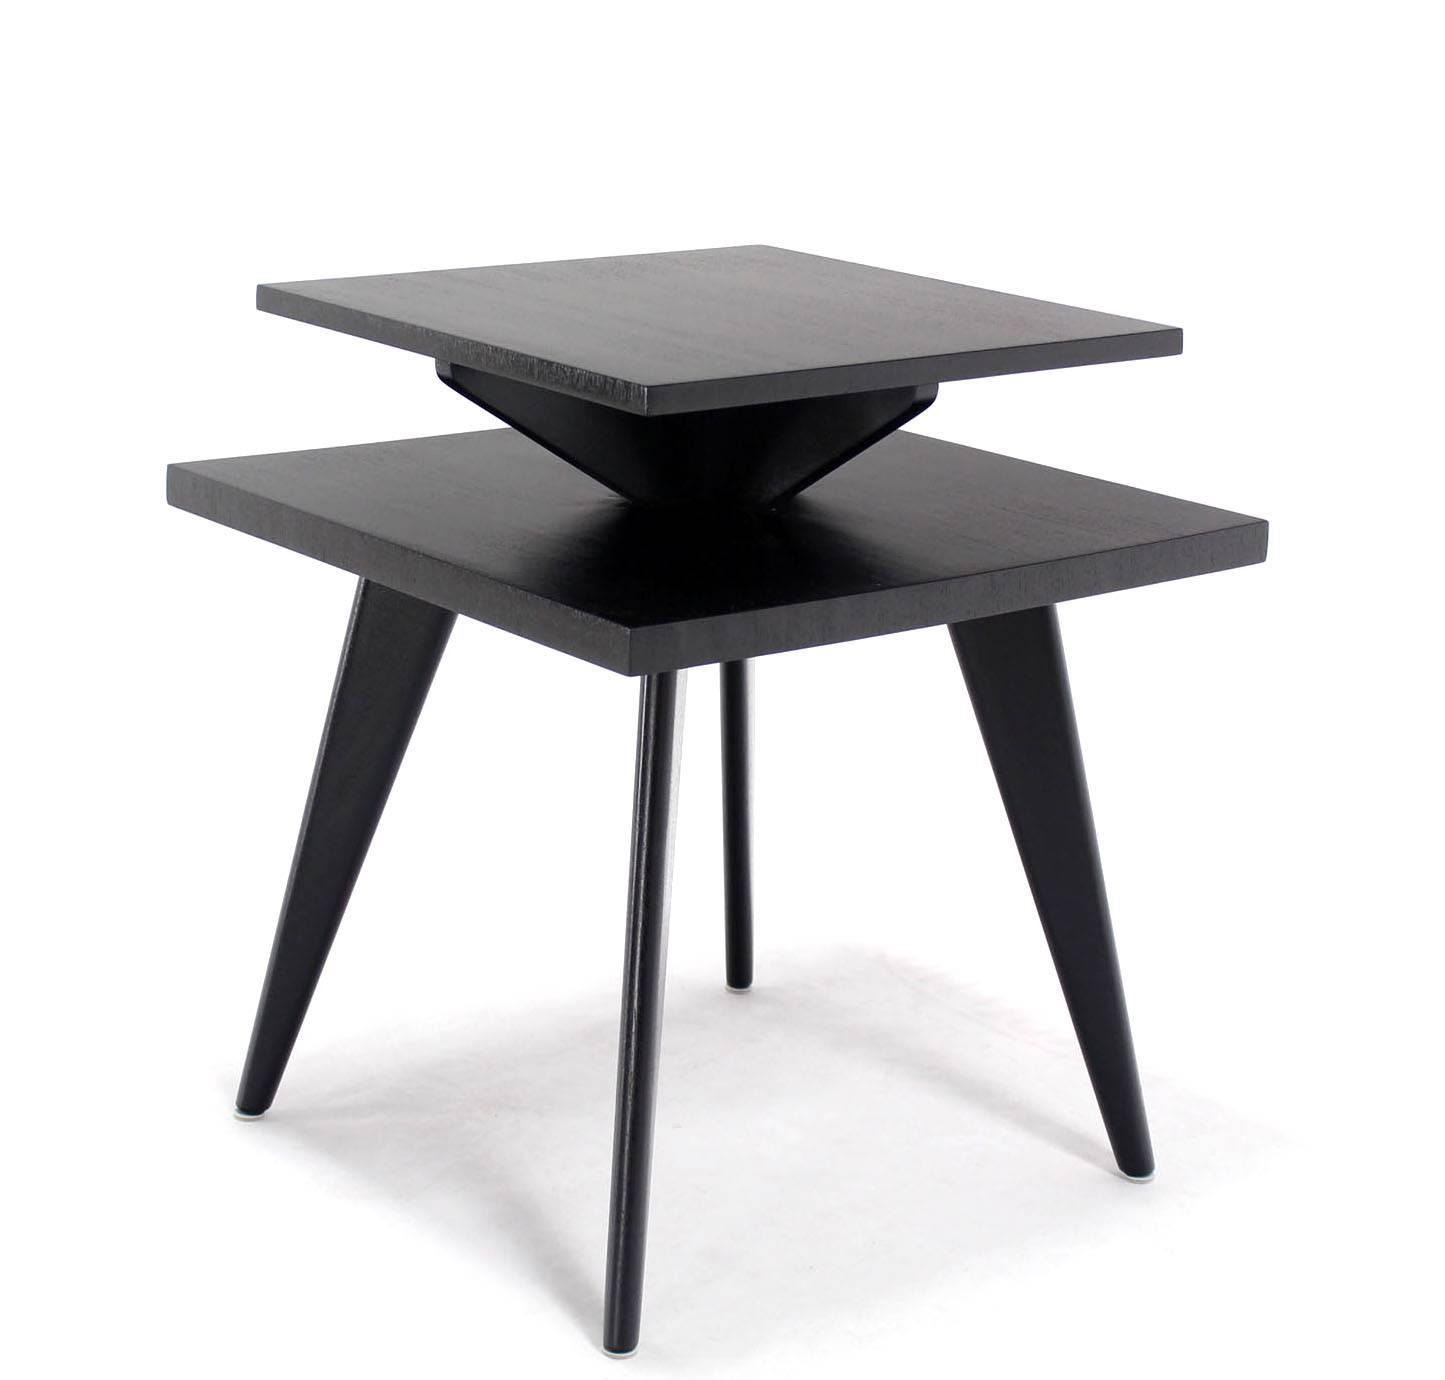 Nice Mid-Century Modern black lacquer side table. Heavy and solid design construction.